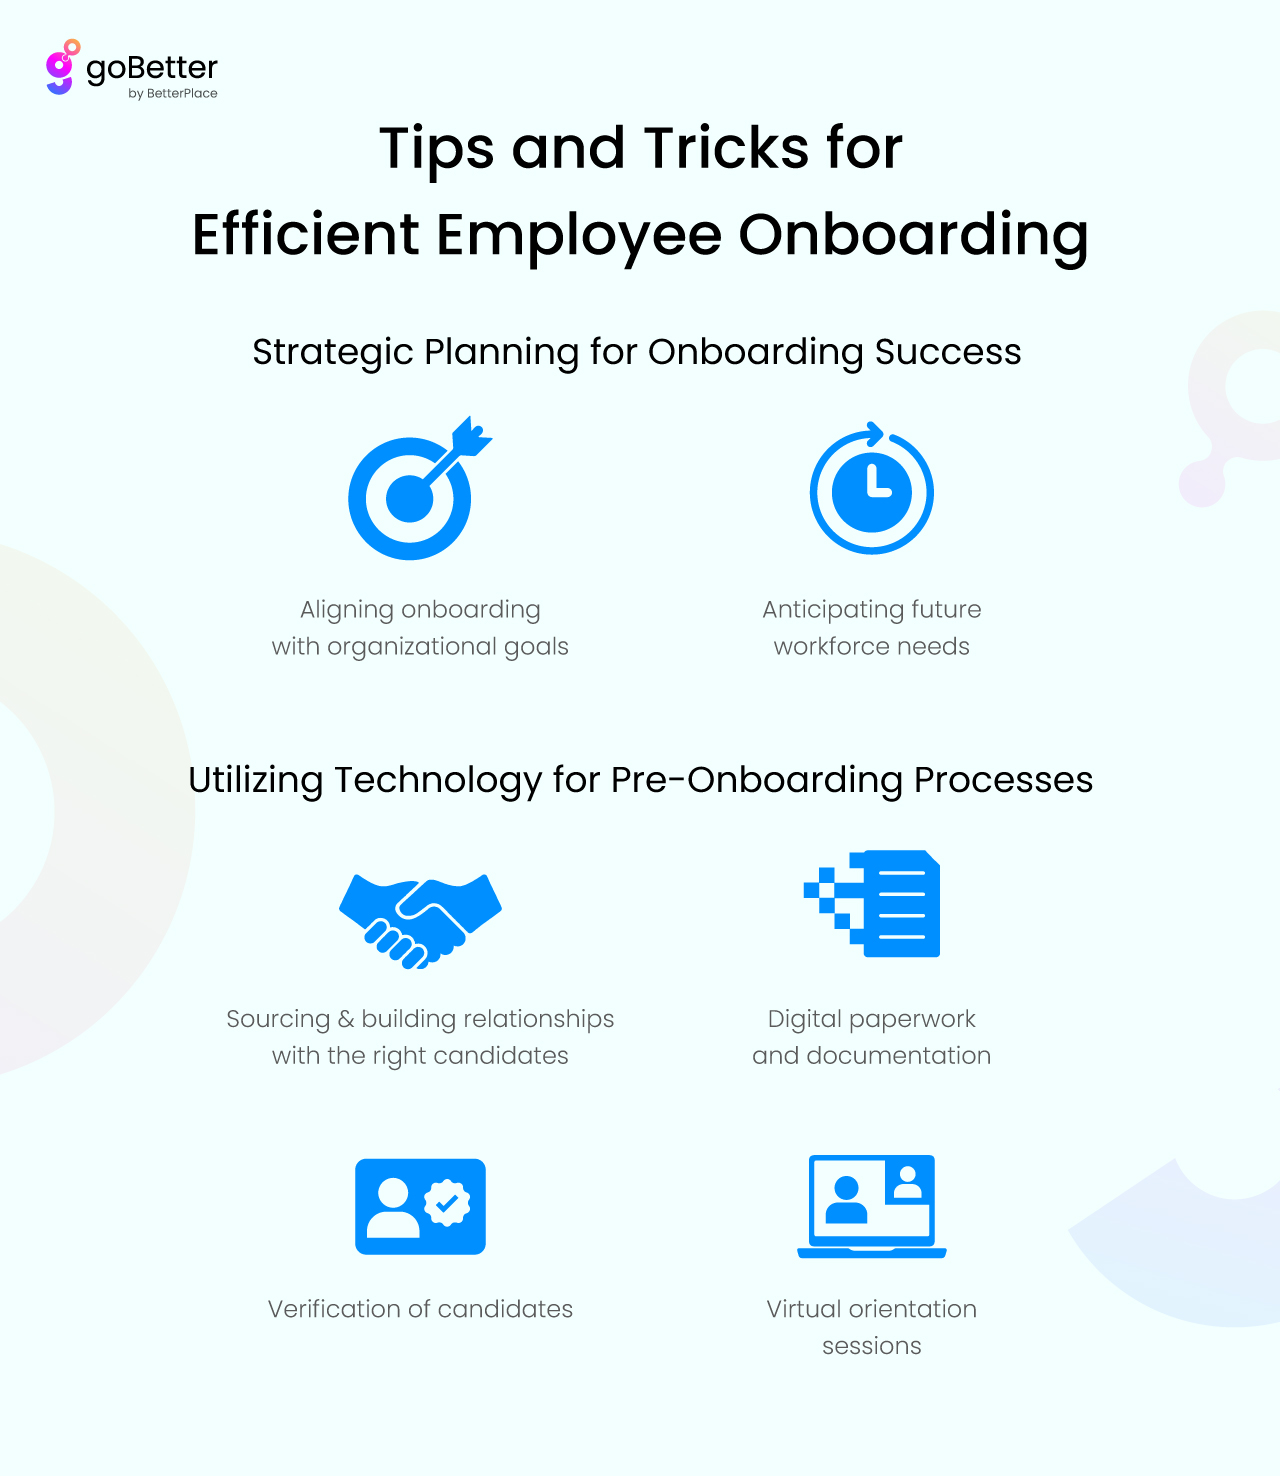 Tips and Tricks for Efficient Employee Onboarding- goBetter 